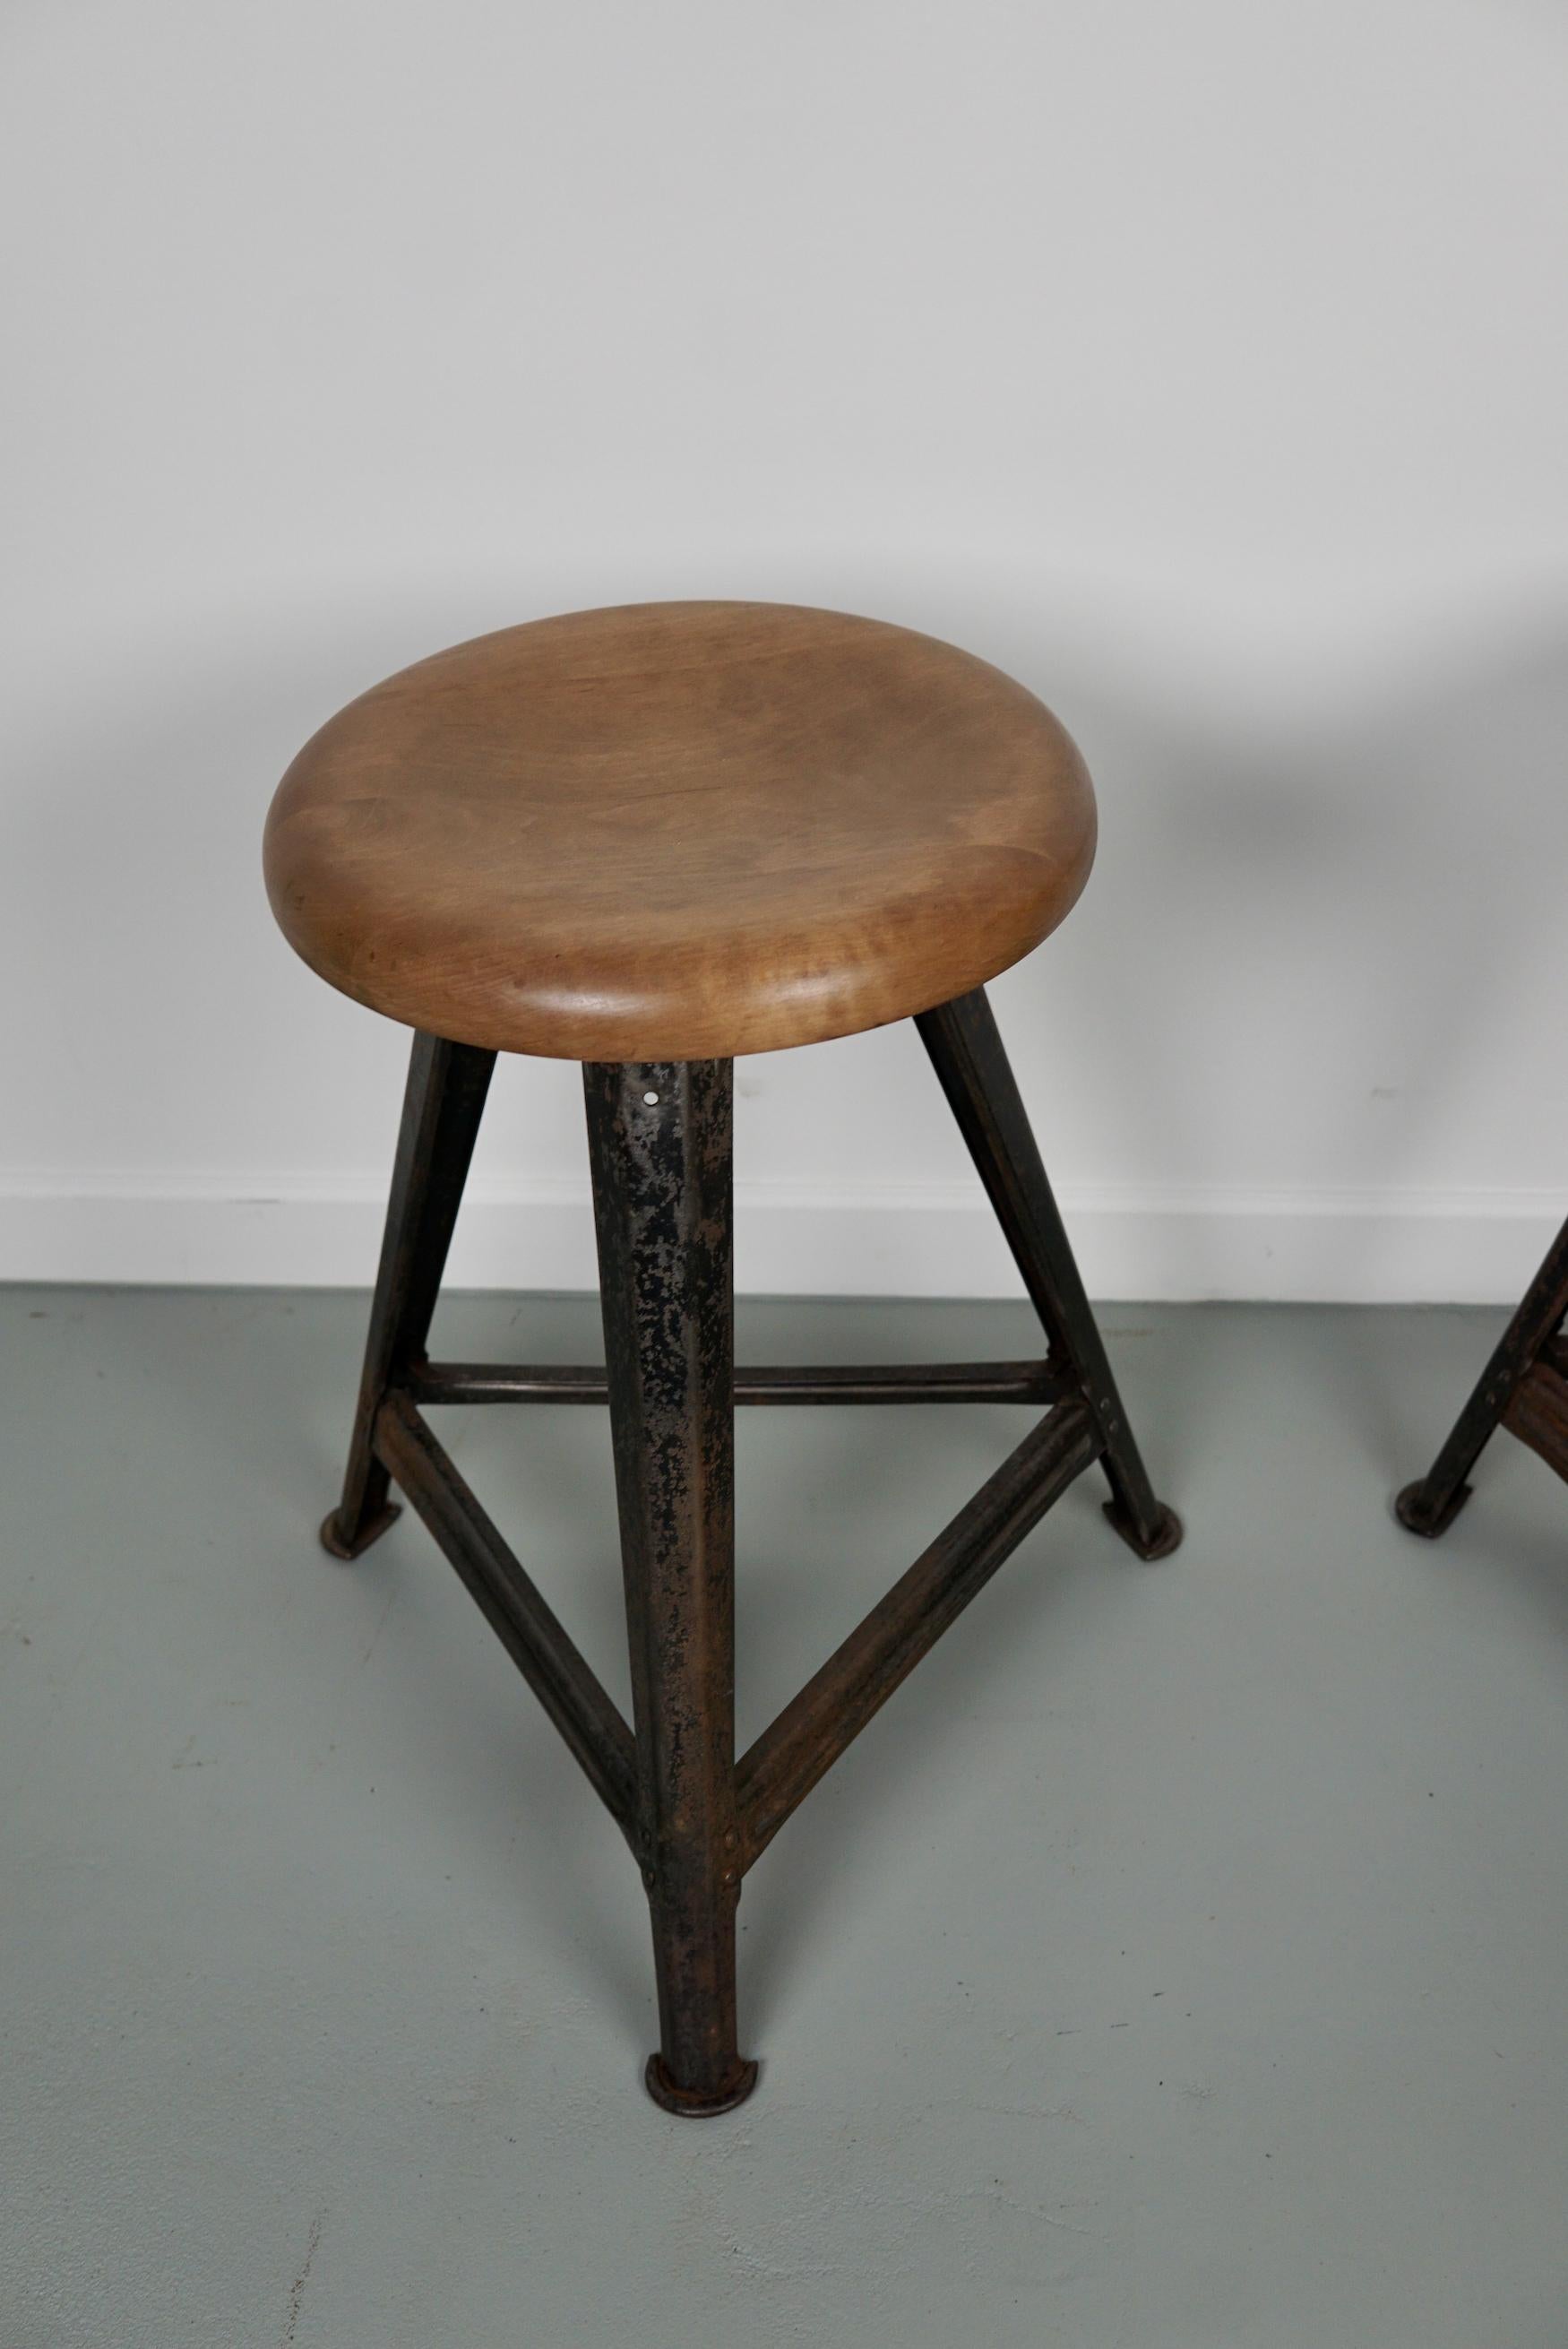 Mid-20th Century Pair of Industrial Steel Factory Stools by Rowac Robert Wagner Chemnitz, 1930s For Sale